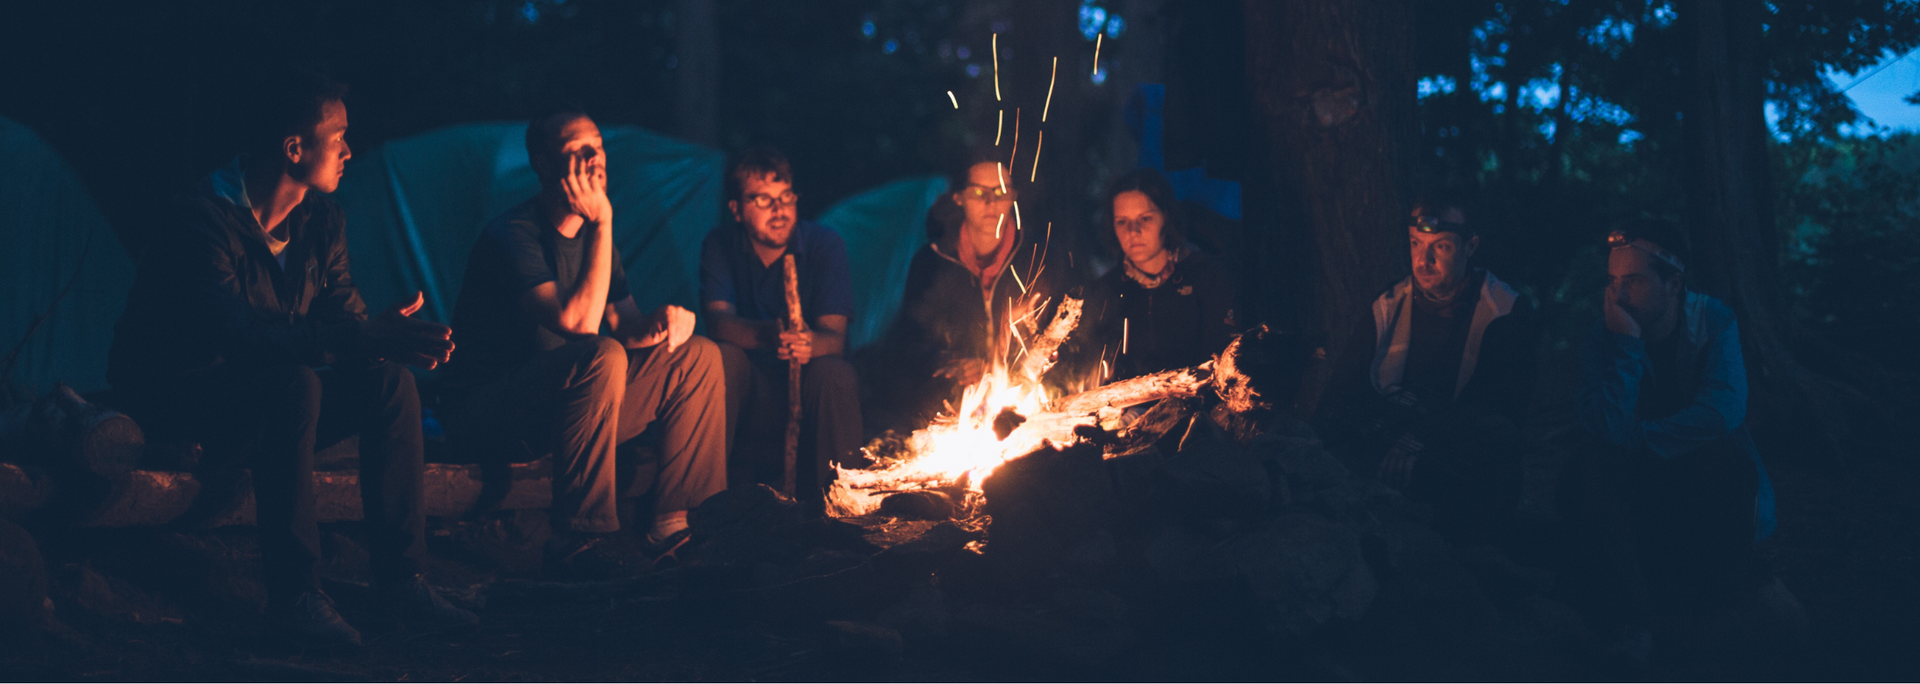 Picture of a group of people in outdoor gear chatting around a fire.